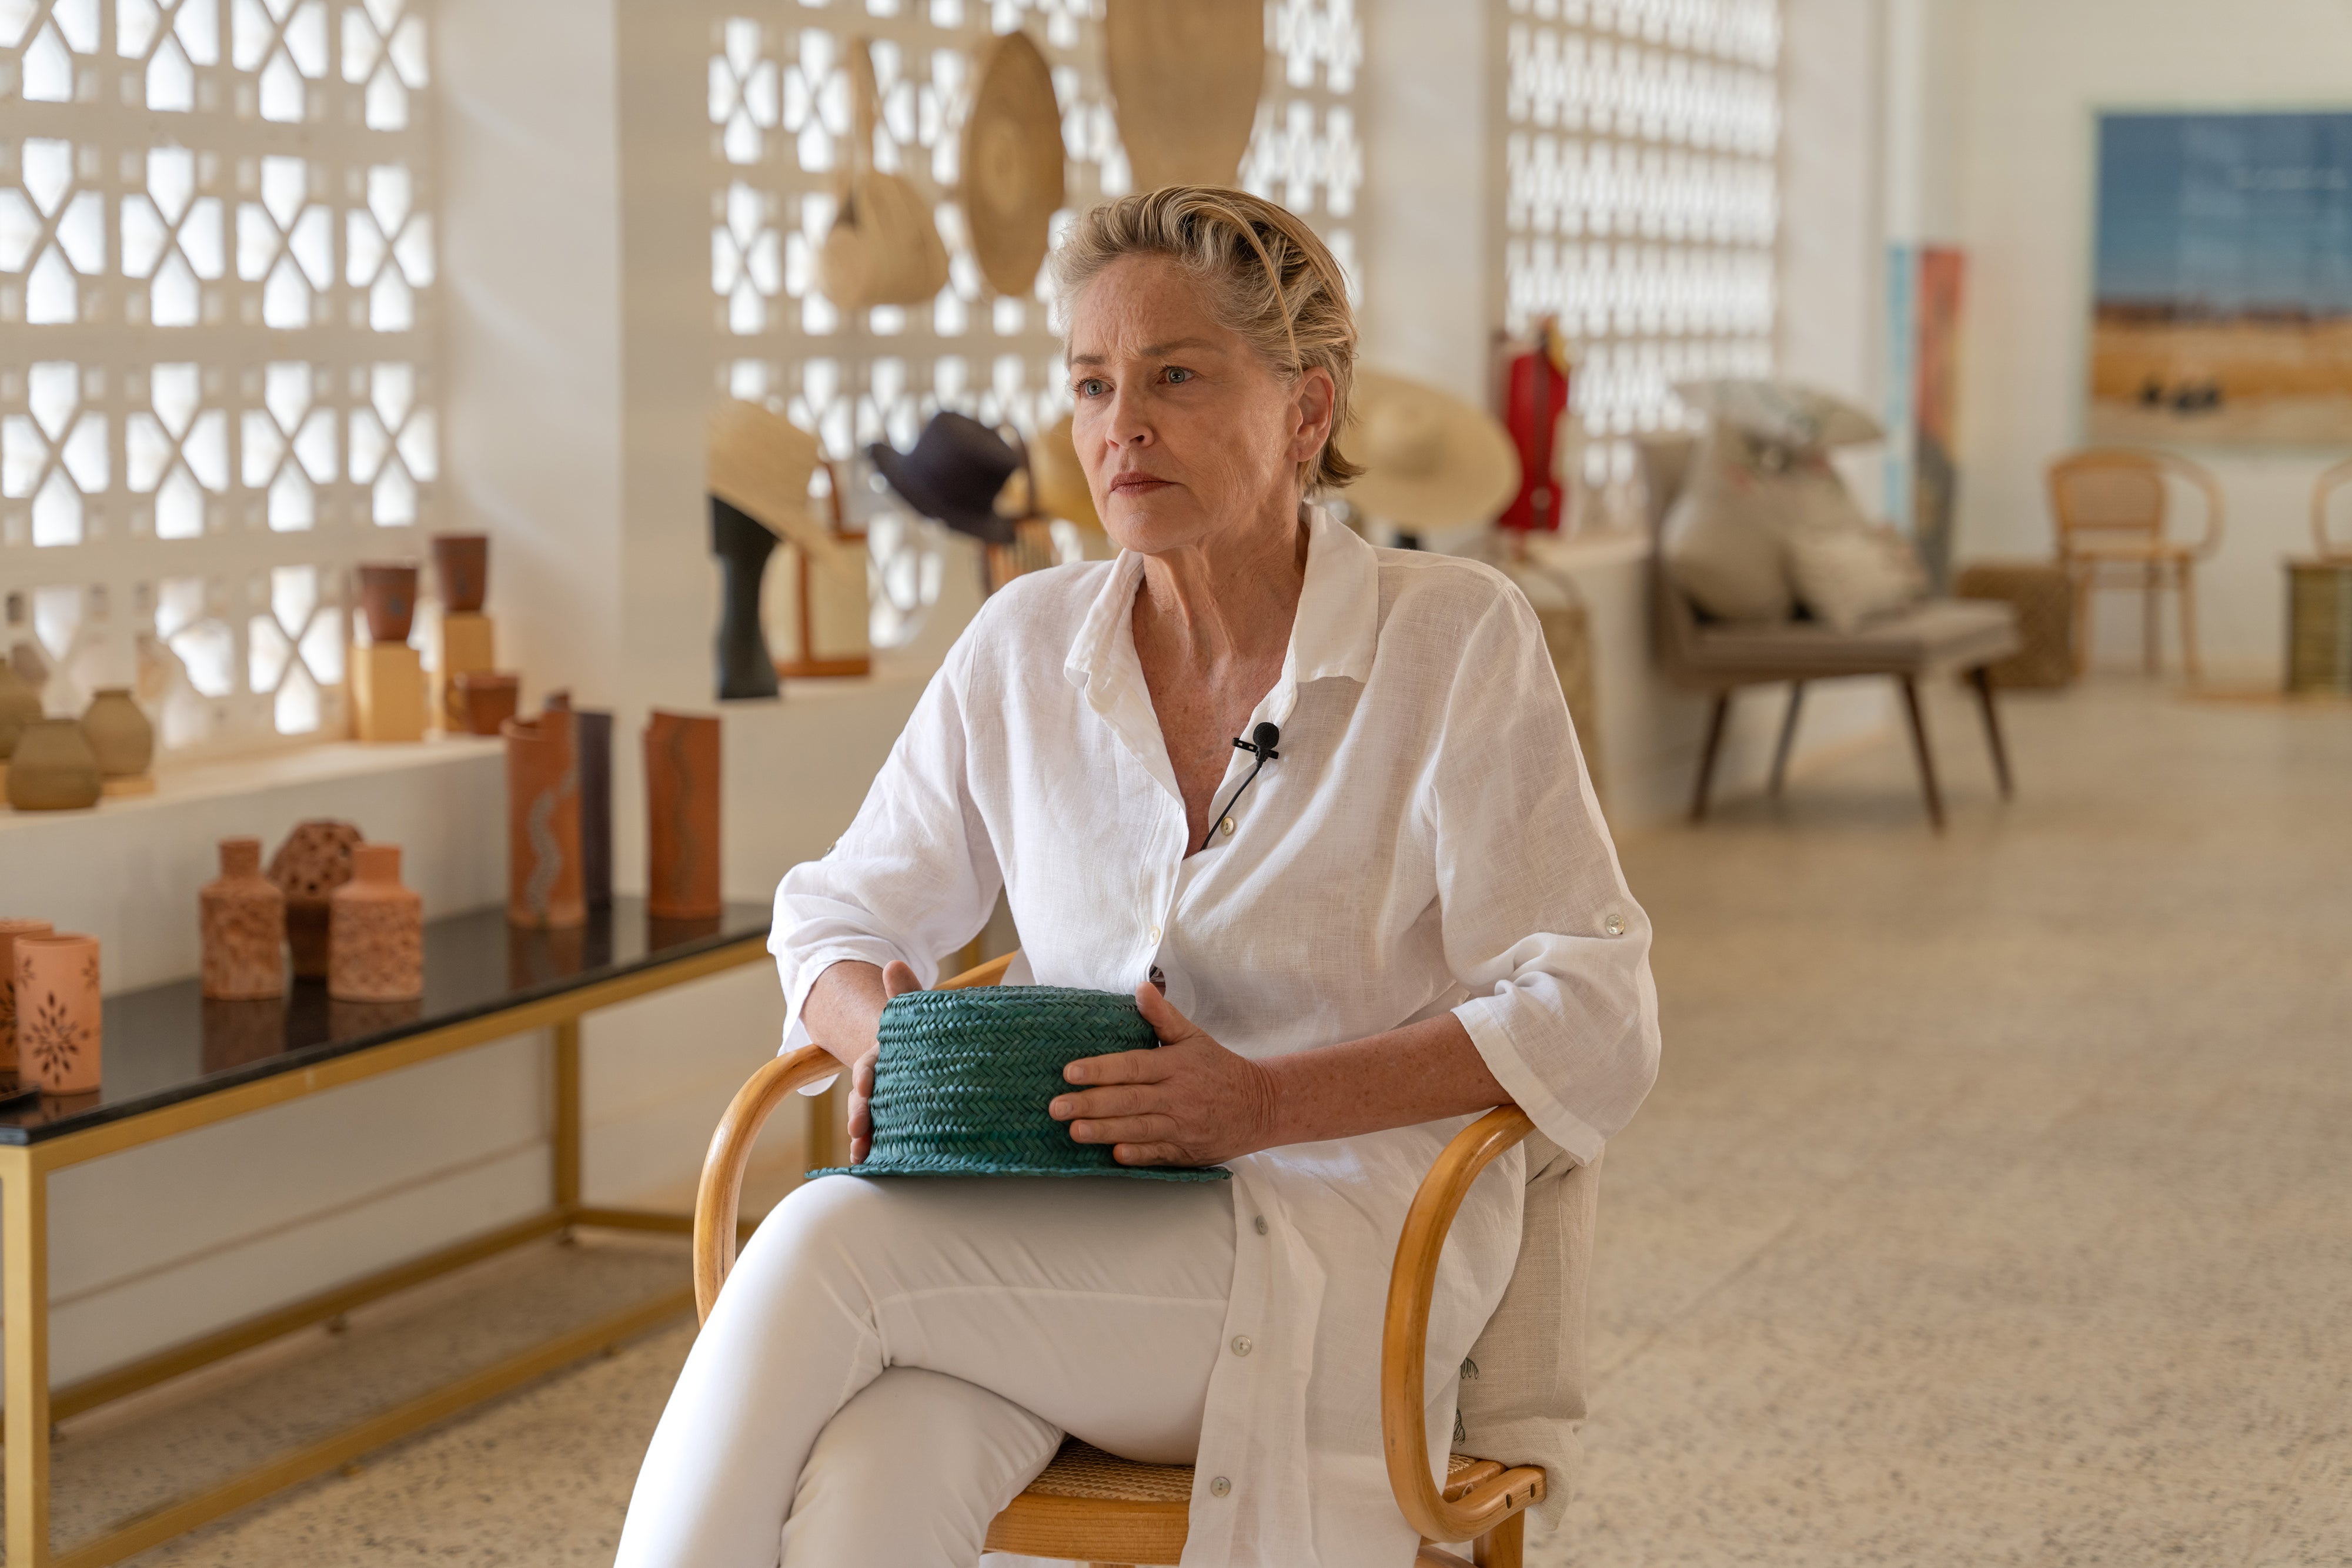 If the hat fits: Sharon Stone, pictured in an arts centre in AlUla, is forging a new path as artist and humanitarian